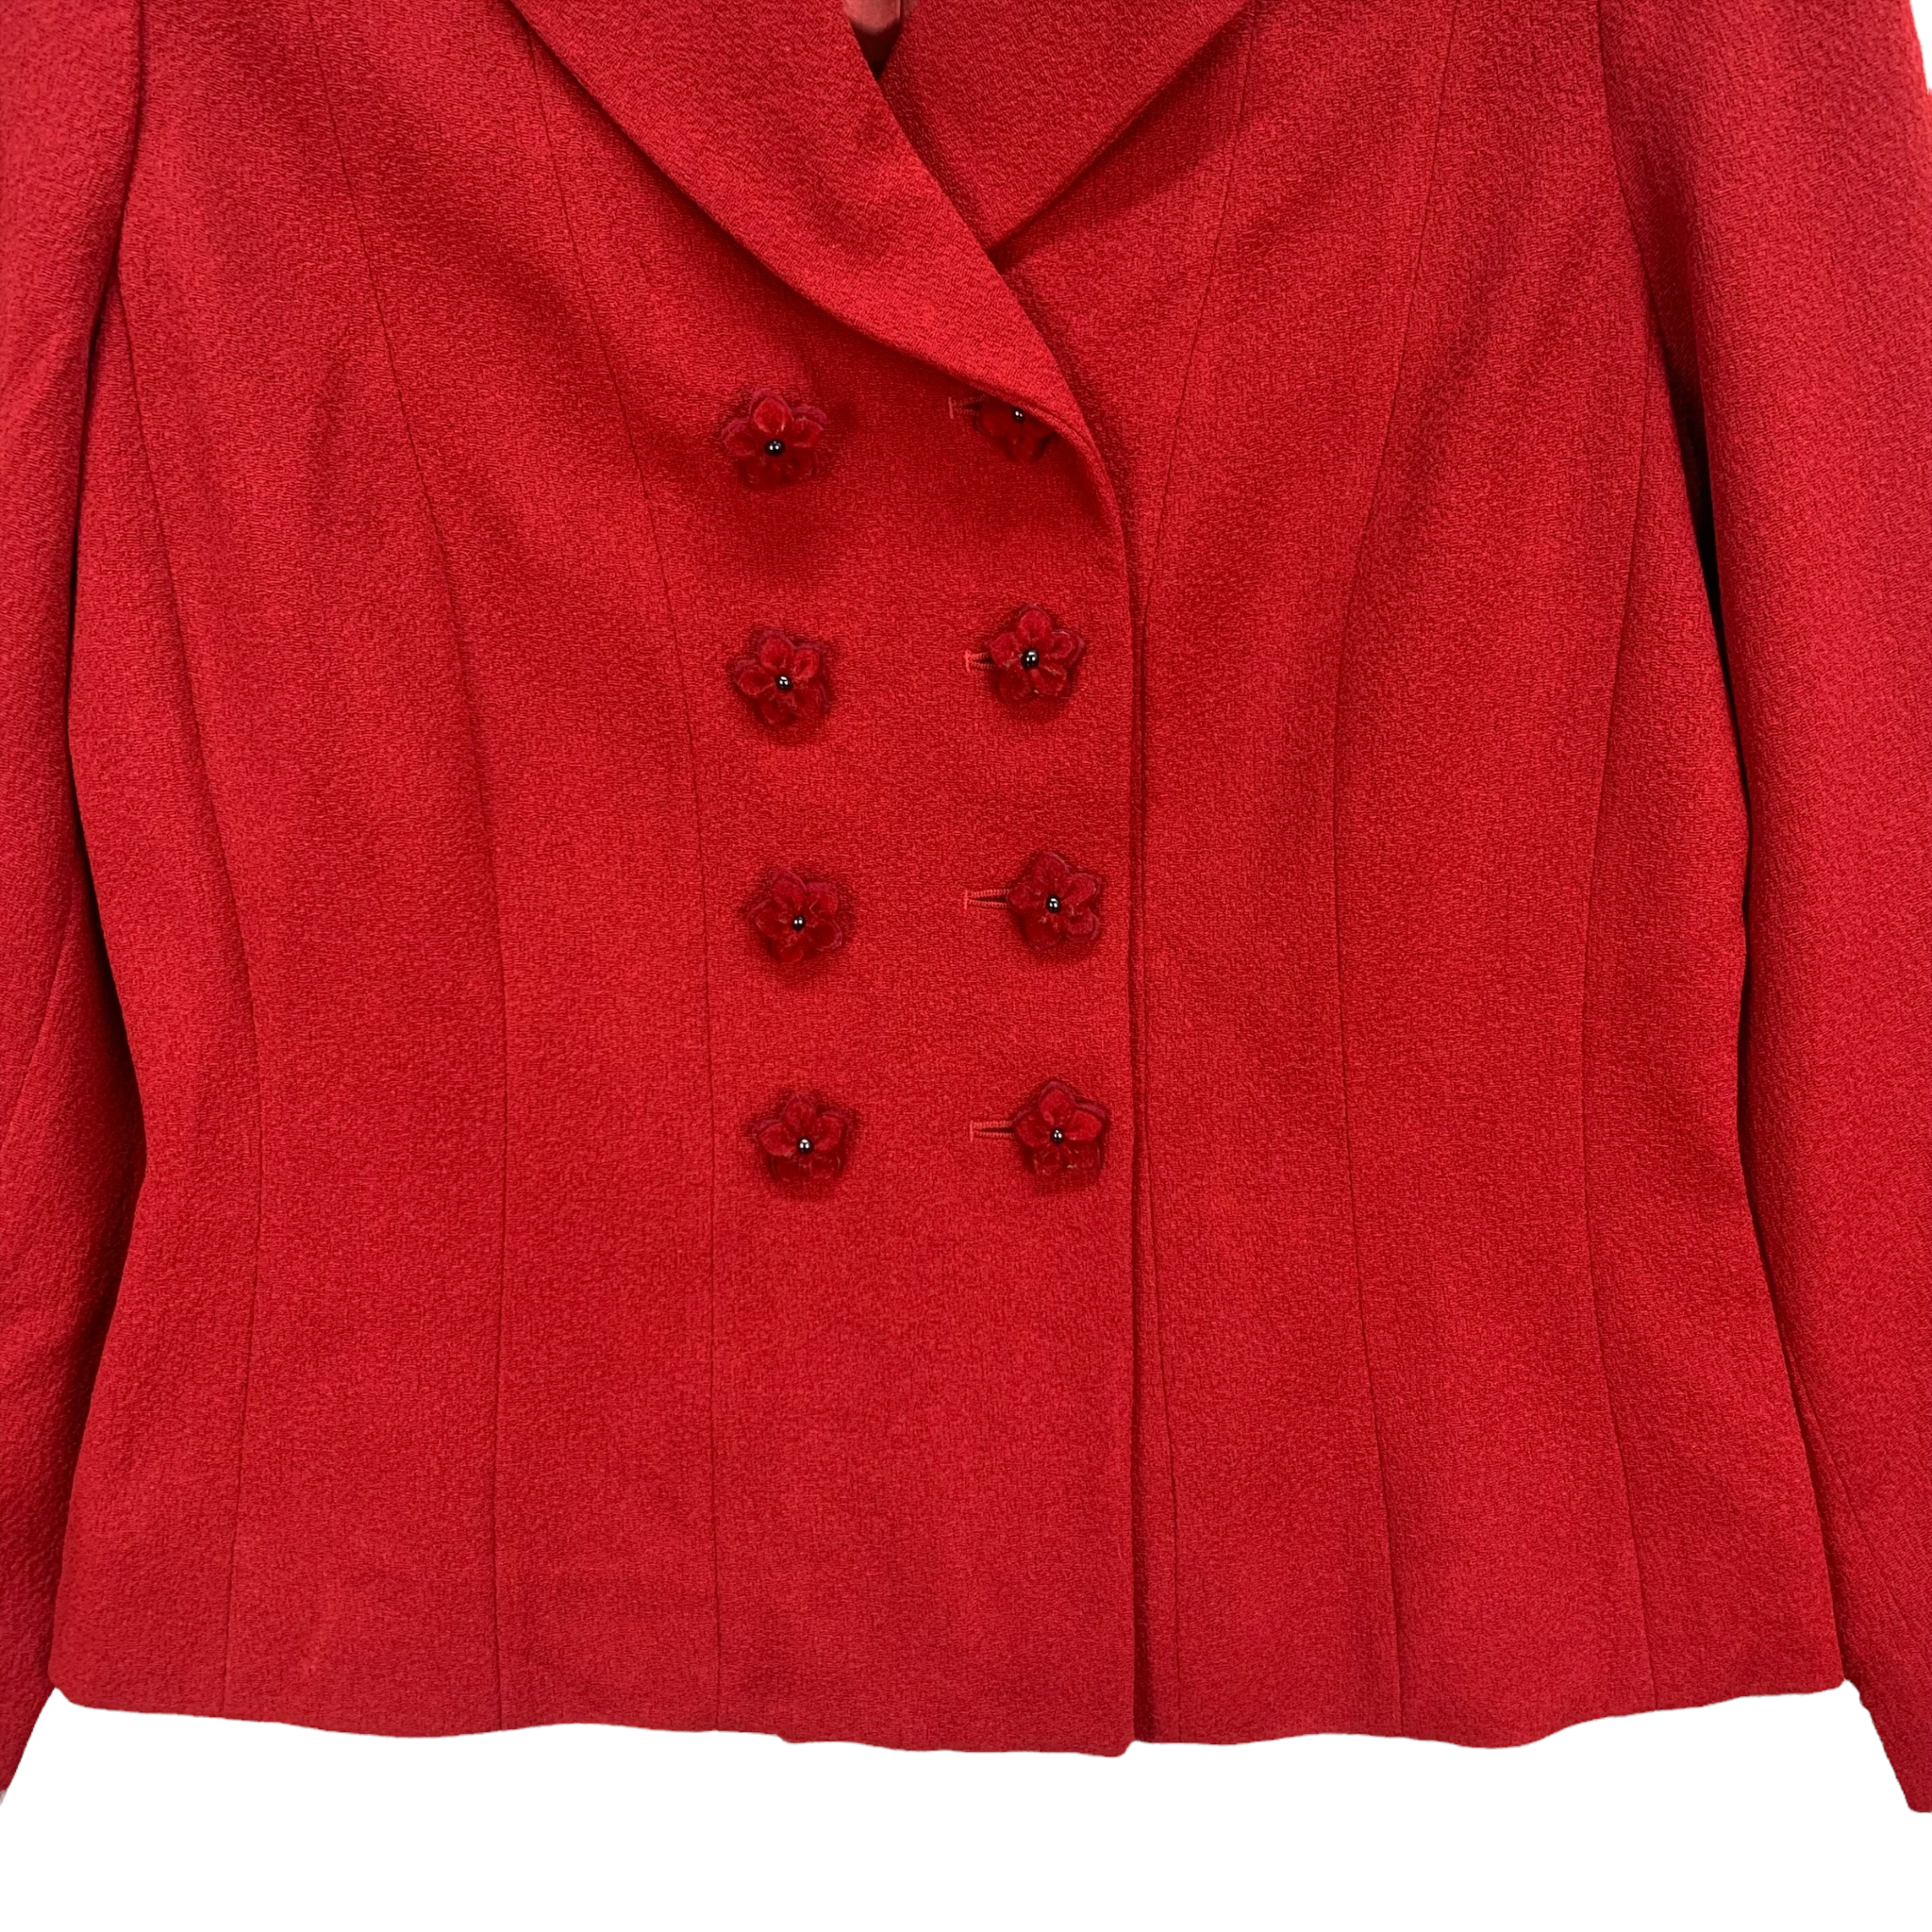 Moschino Cheap and Chic Red Double Breasted Coat #3952-137 - 3